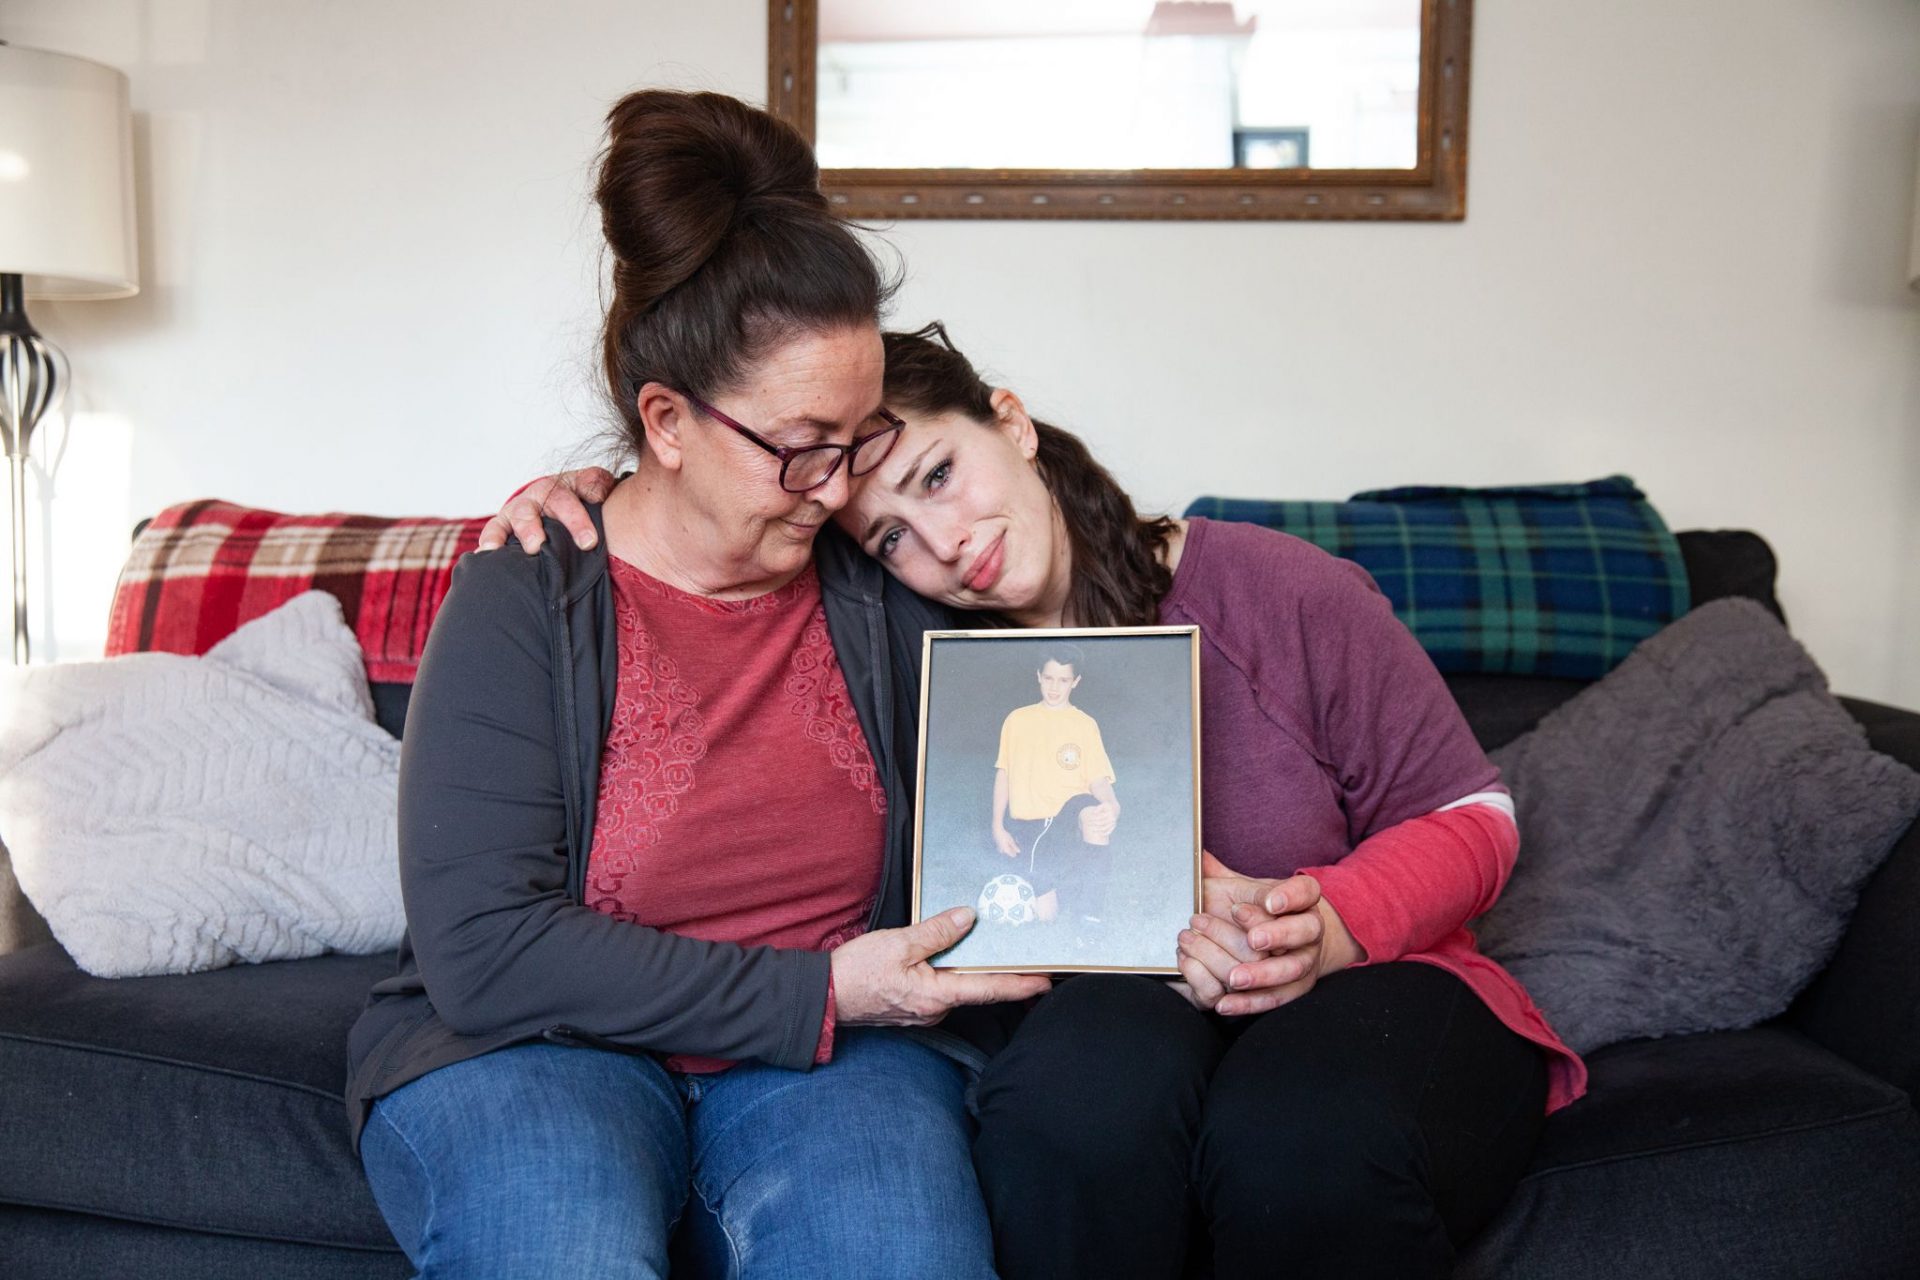 Andrea Zack (left) and her daughter, Amanda Pschirer, are grieving the death of their son and brother, James Pschirer, who died in 2019 of an overdose at a recovery home in Allegheny County. Andrea said she usually avoids looking at pictures of him: “It hurts too much.”